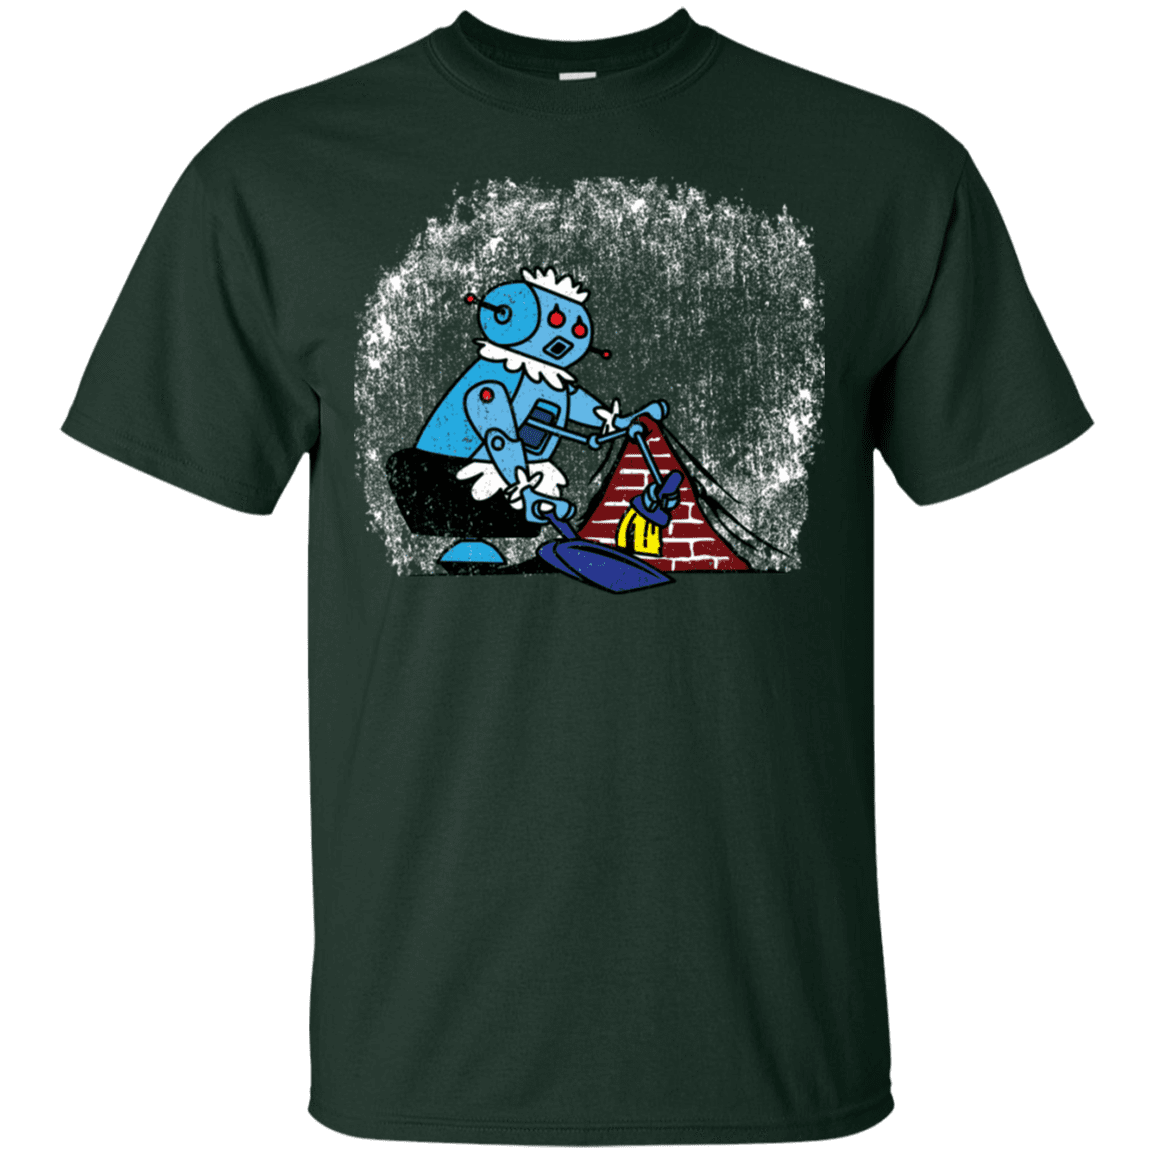 T-Shirts Forest / S Robot Cleaner T-Shirt